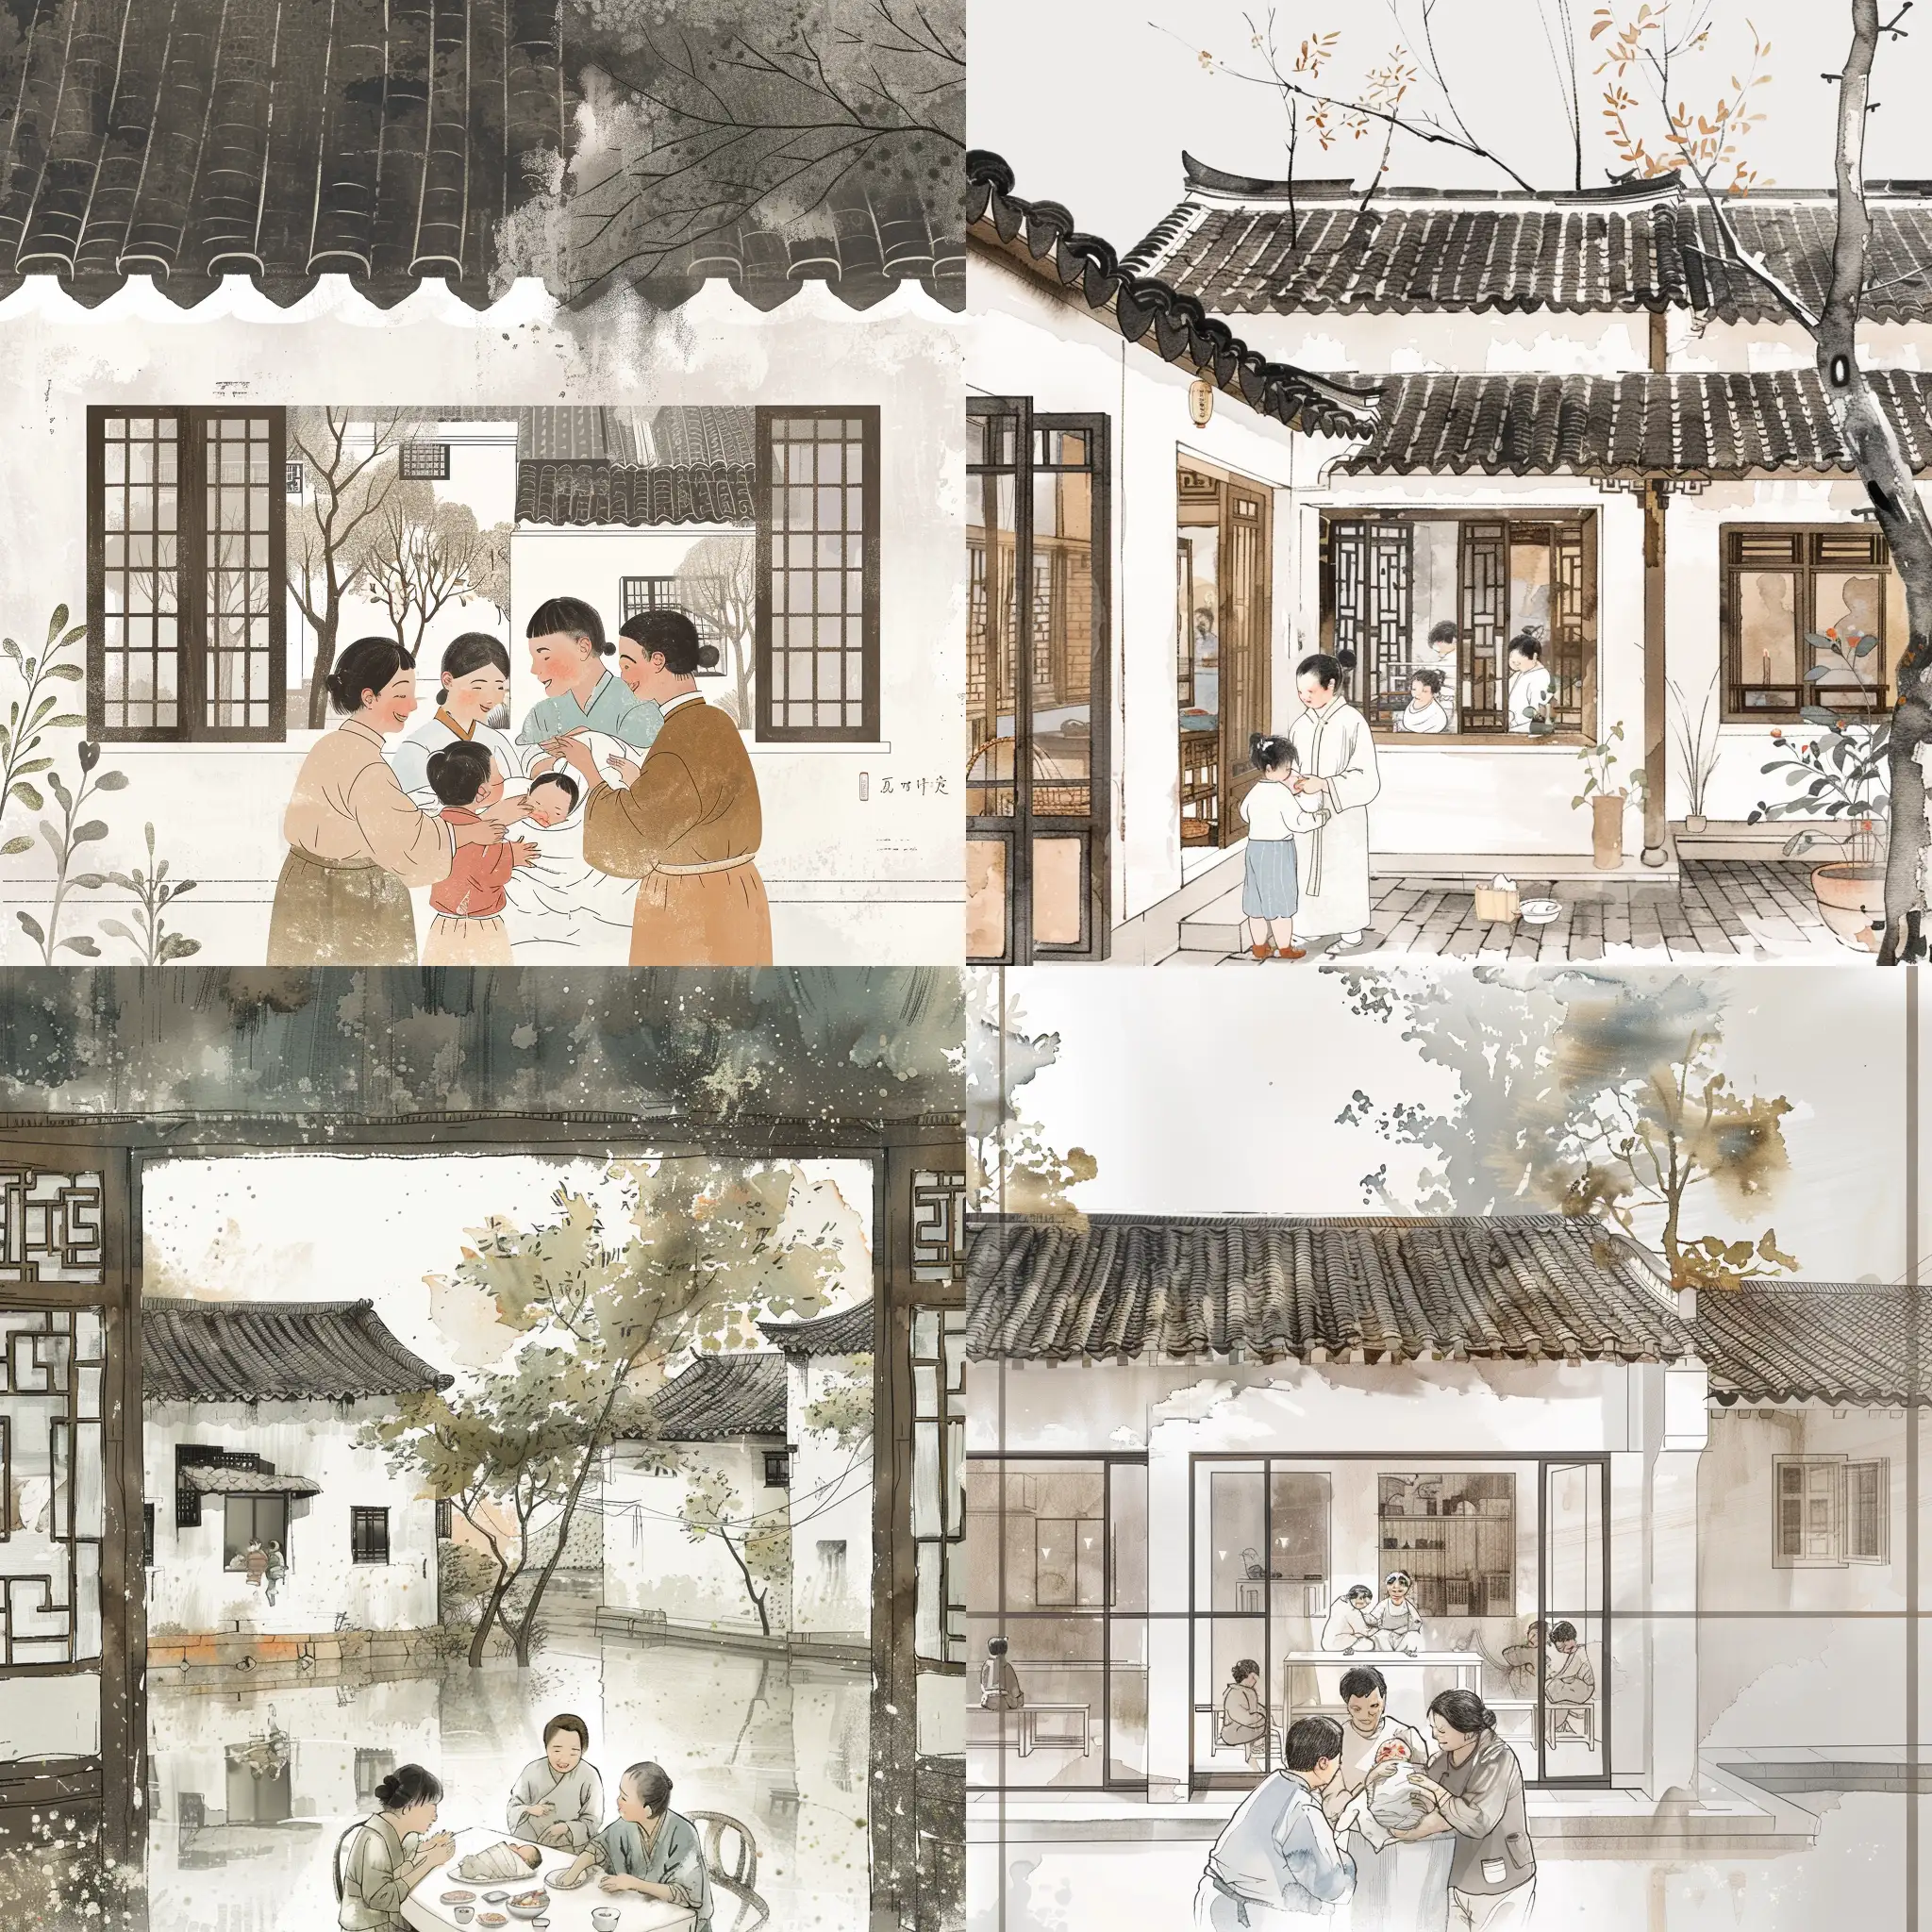 Within the quietude of a classic Chinese water village, encapsulated by white-walled, black-tiled houses, a family gathers in a room steeped in tradition and warmth to celebrate the birth of their newest member. The scene unfolds in an intimate indoor setting where the rich heritage of Guangdong's Shunde is palpable through each carefully chosen detail. Delicate, hand-drawn illustrations capture the jubilant faces of the family, their joy magnified in the presence of the tender newborn cradled in loving arms. Stylized trees and subtle earthy tones peek through the windows, complementing the room's ambient interior. Rendered in classic Chinese ink and watercolor style, this artistic portrayal marries serene village elements with an authentic depiction of Chinese familial bliss, all curated from an artistic perspective that invites viewers to witness this momentous beginning. It's a scene of heartwarming human connection, lovingly woven into the fabric of the landscape that has stood the test of time.